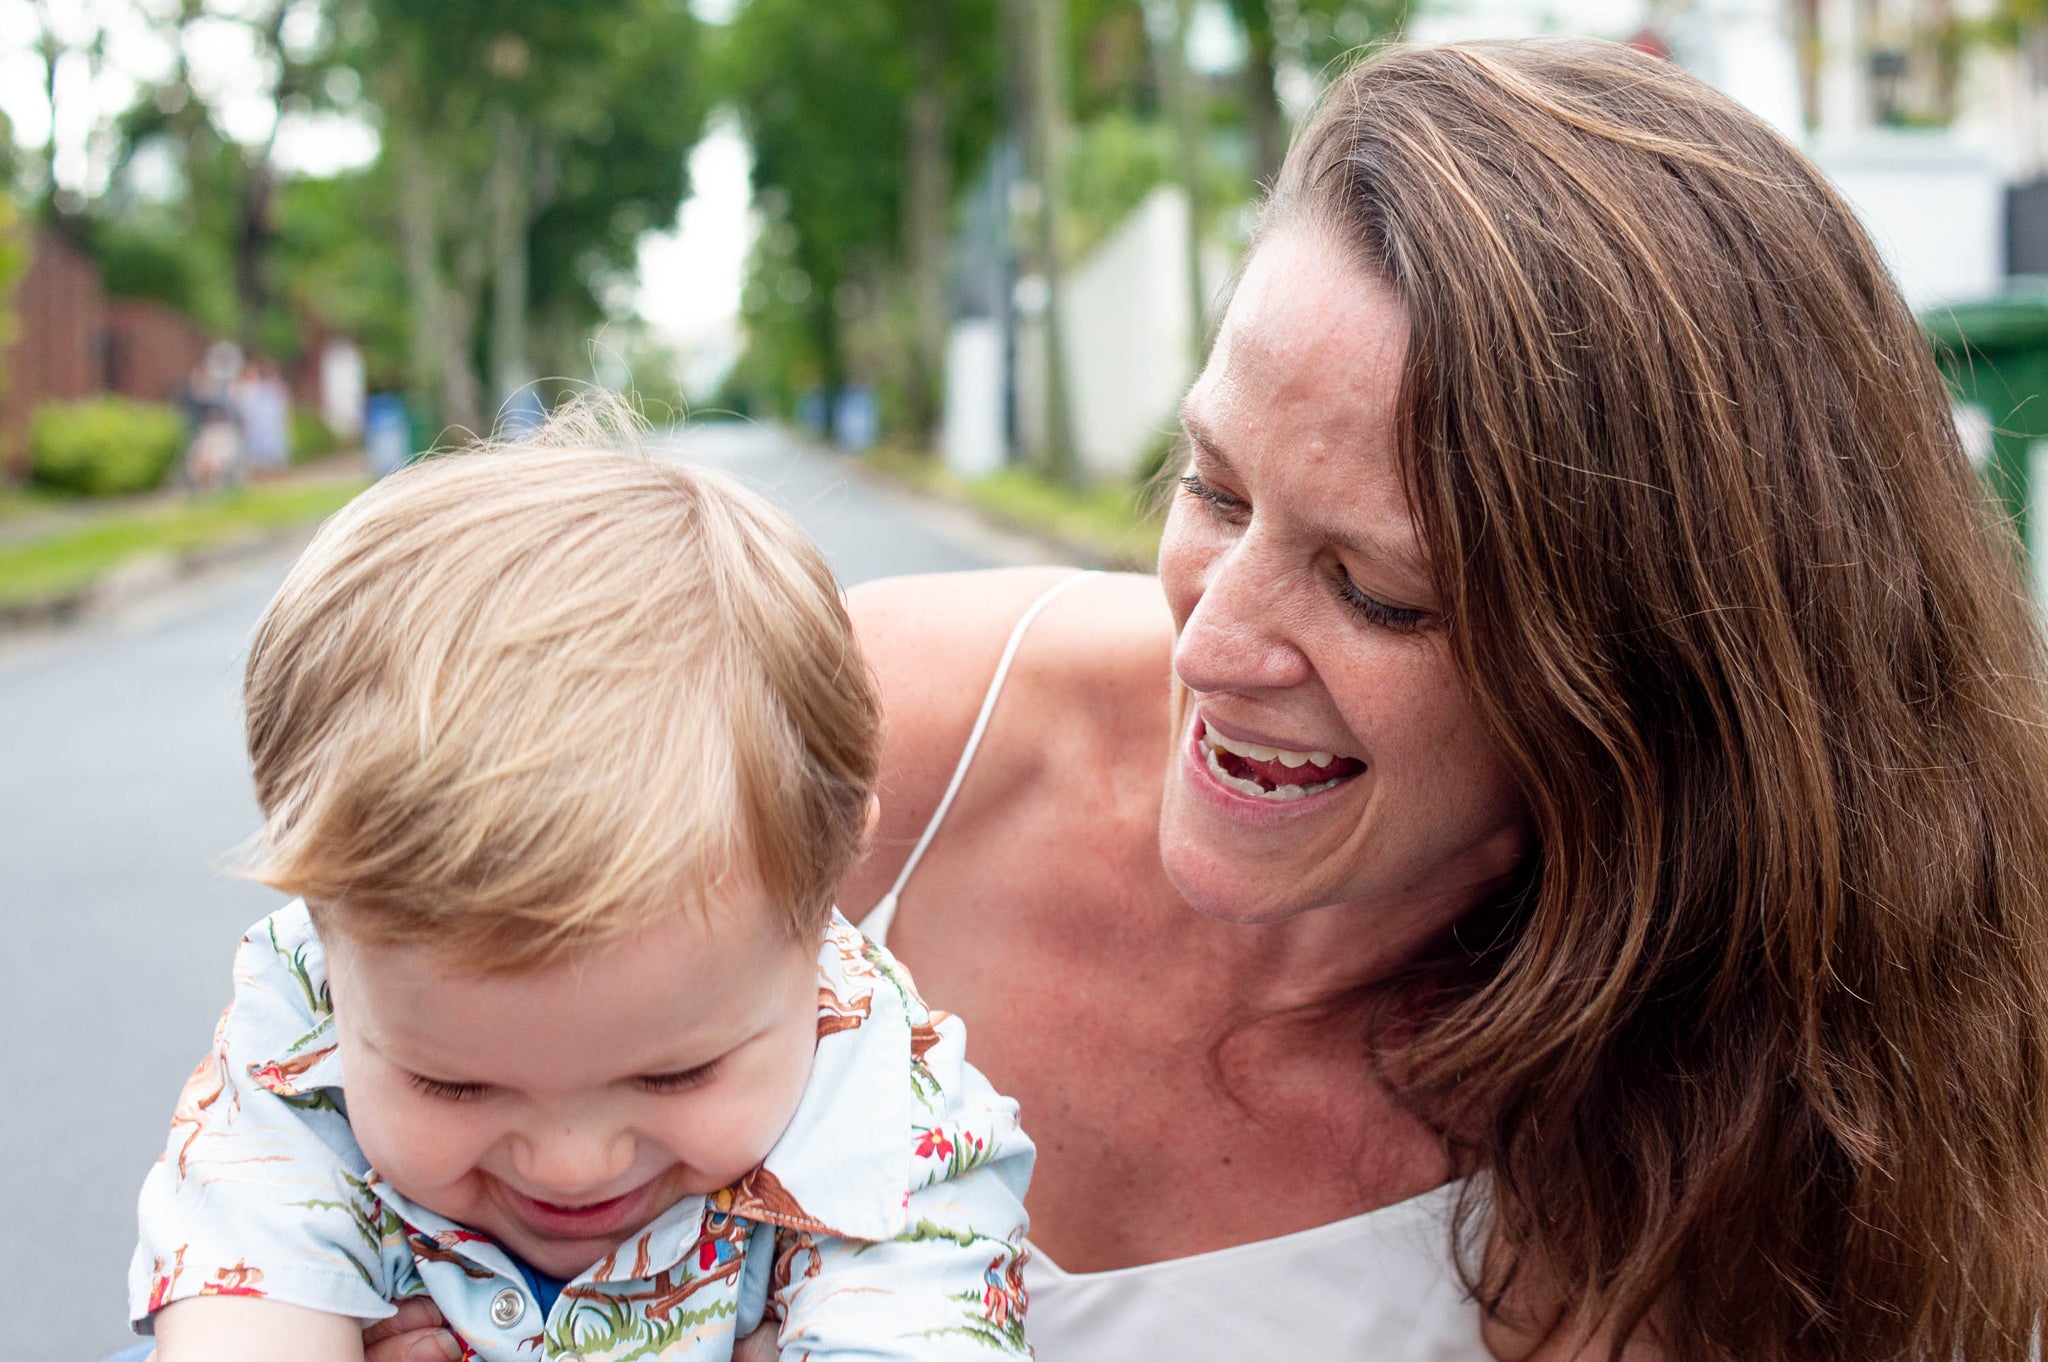 health coach and nutritionist anne swain with her young son